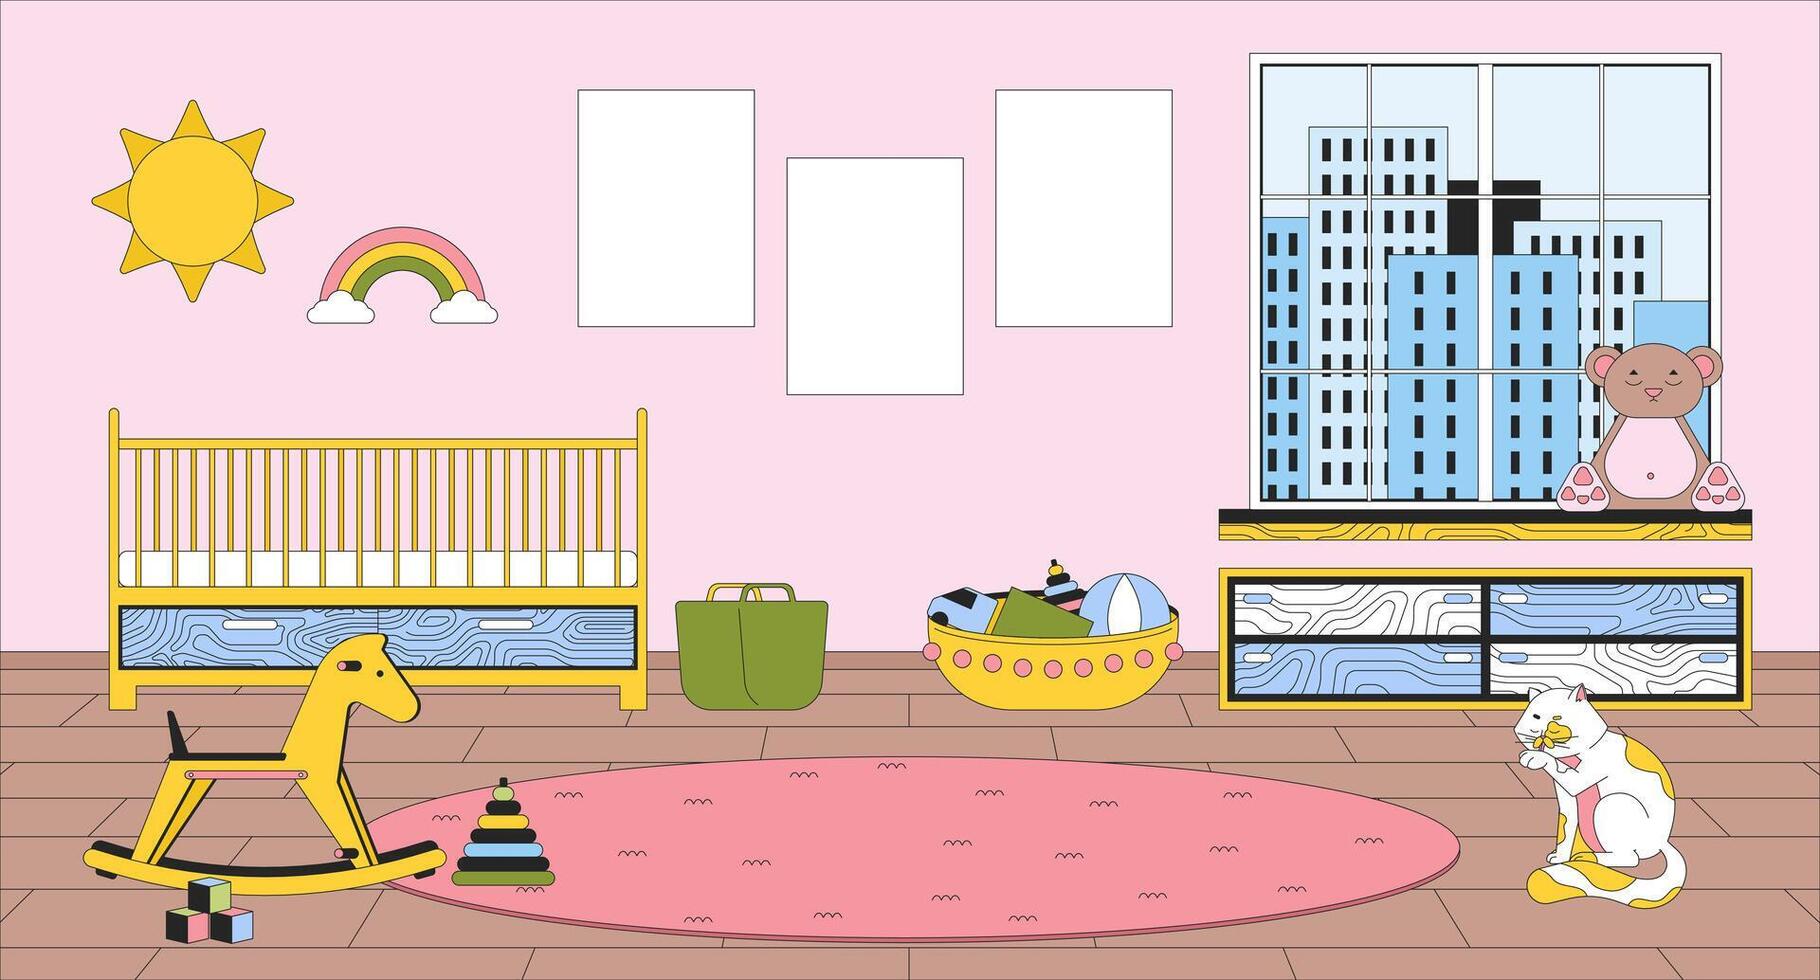 Baby nursery room cartoon flat illustration. Crib bed, round floor rug 2D line interior colorful background. Blank posters wall. Childhood toys. Childrens room scene vector storytelling image